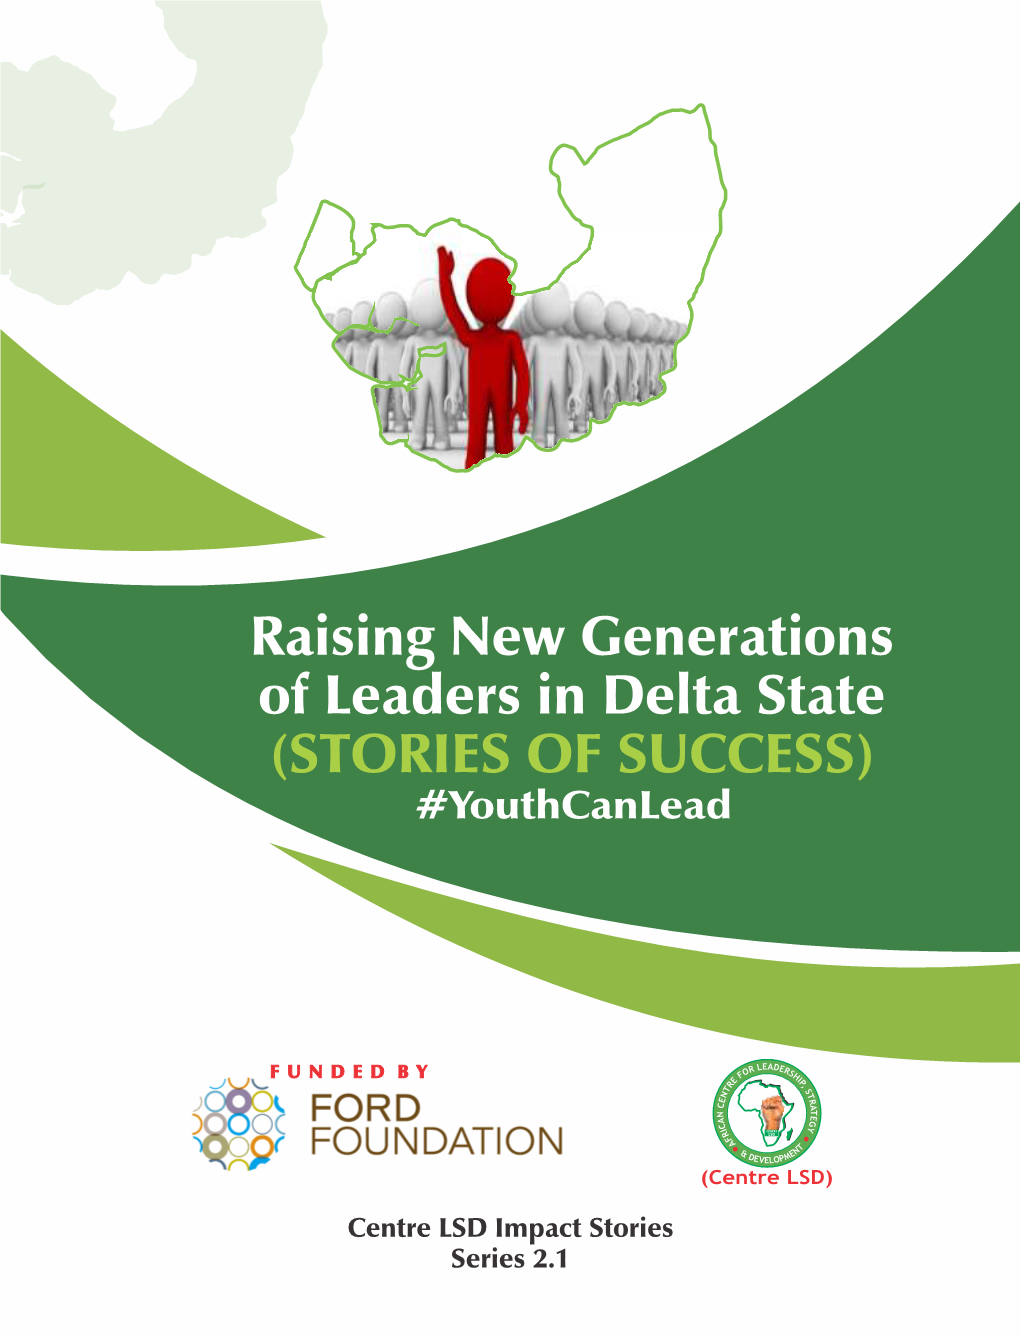 Raising New Generations of Leaders in Delta State (STORIES of SUCCESS) #Youthcanlead